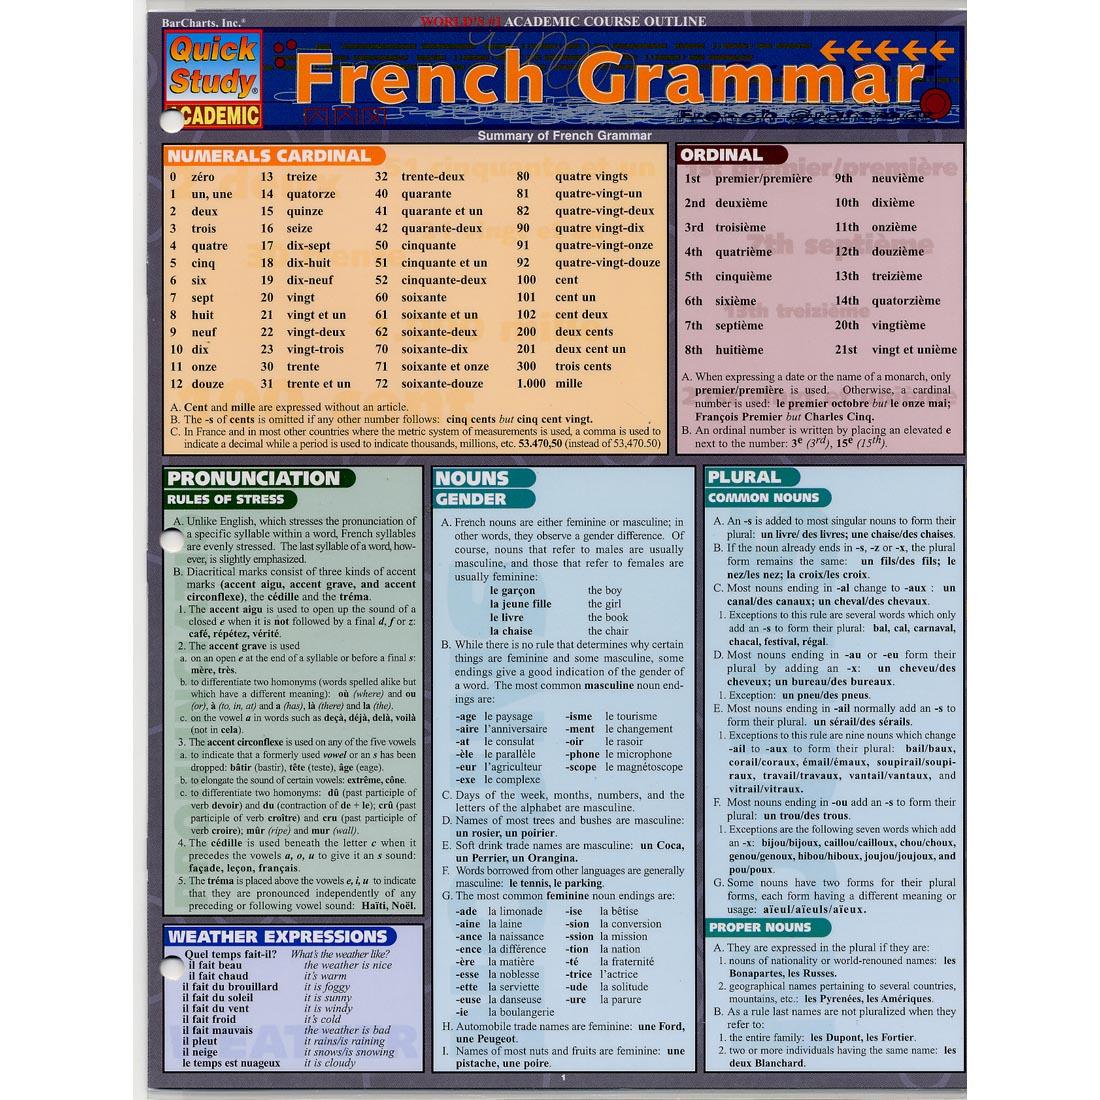 French Grammar Study Guide